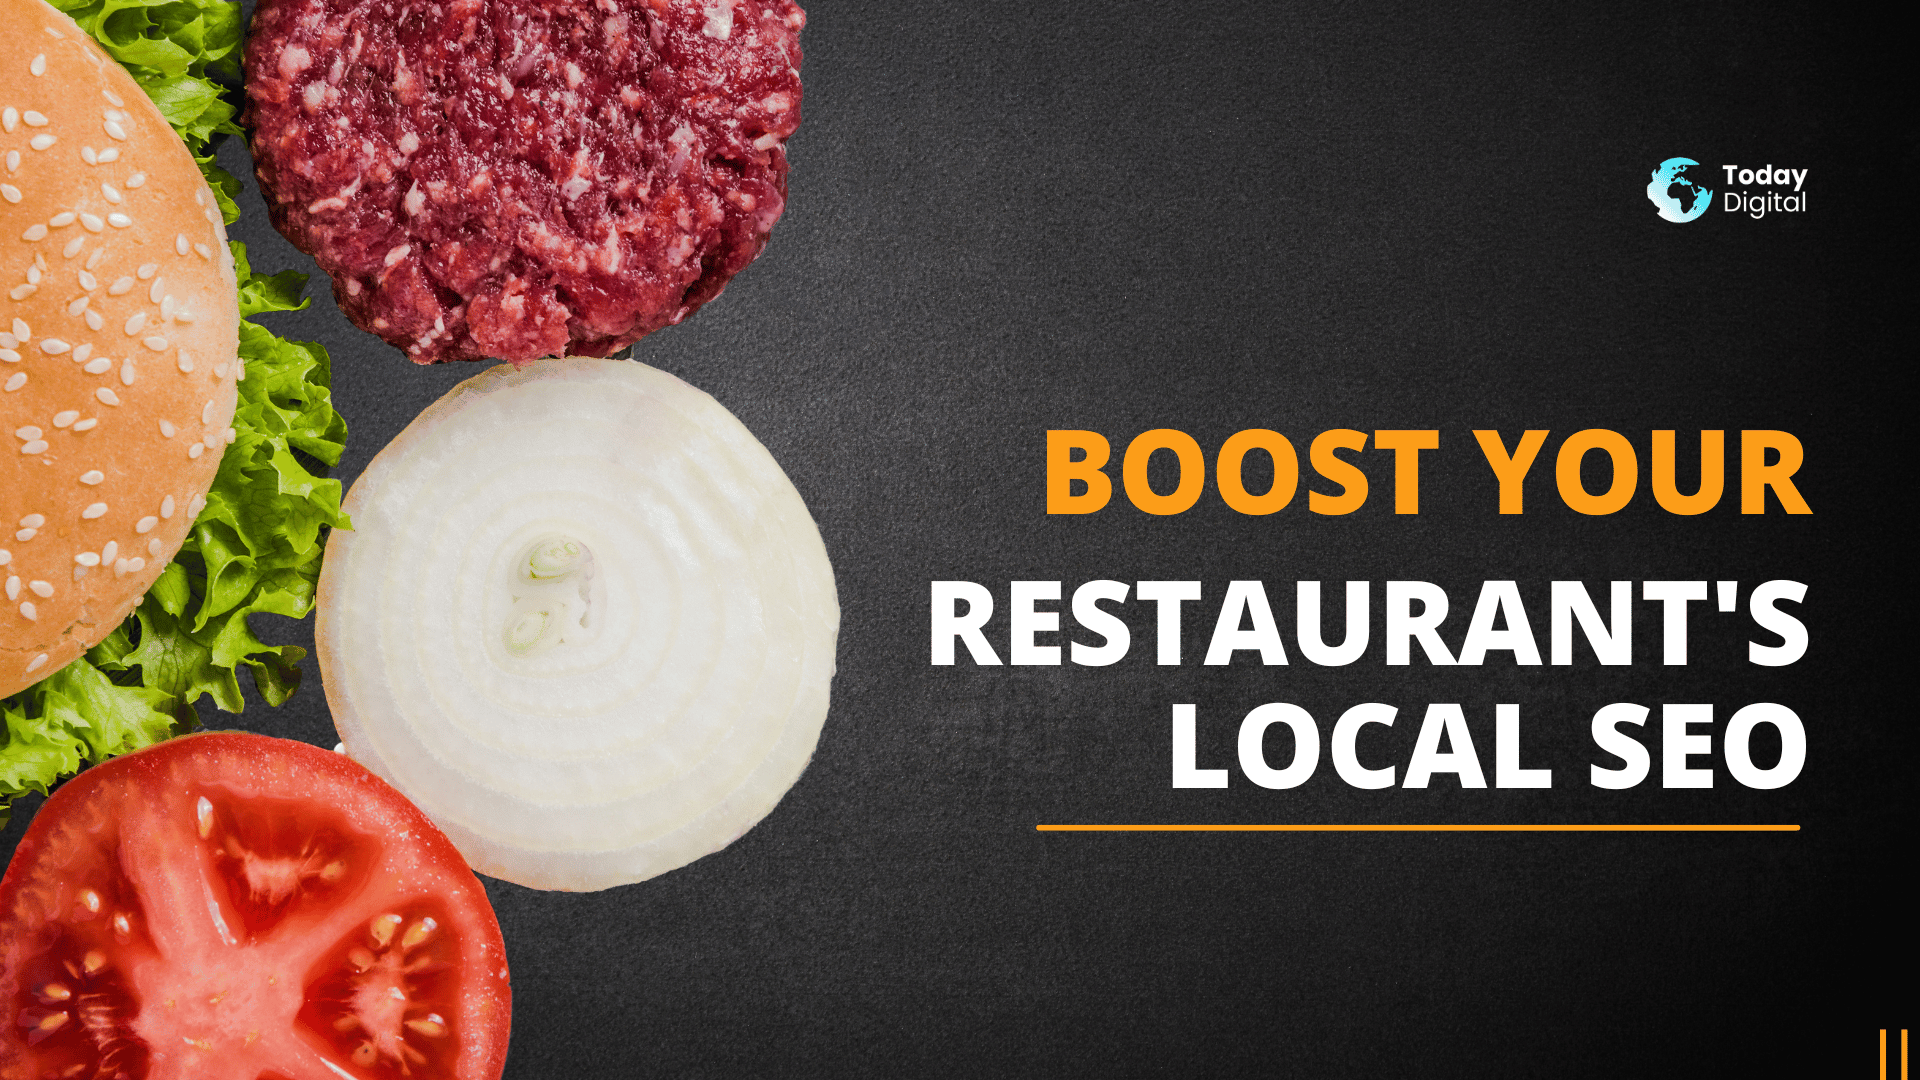 7 Tips to Boost Your Restaurant’s Local SEO